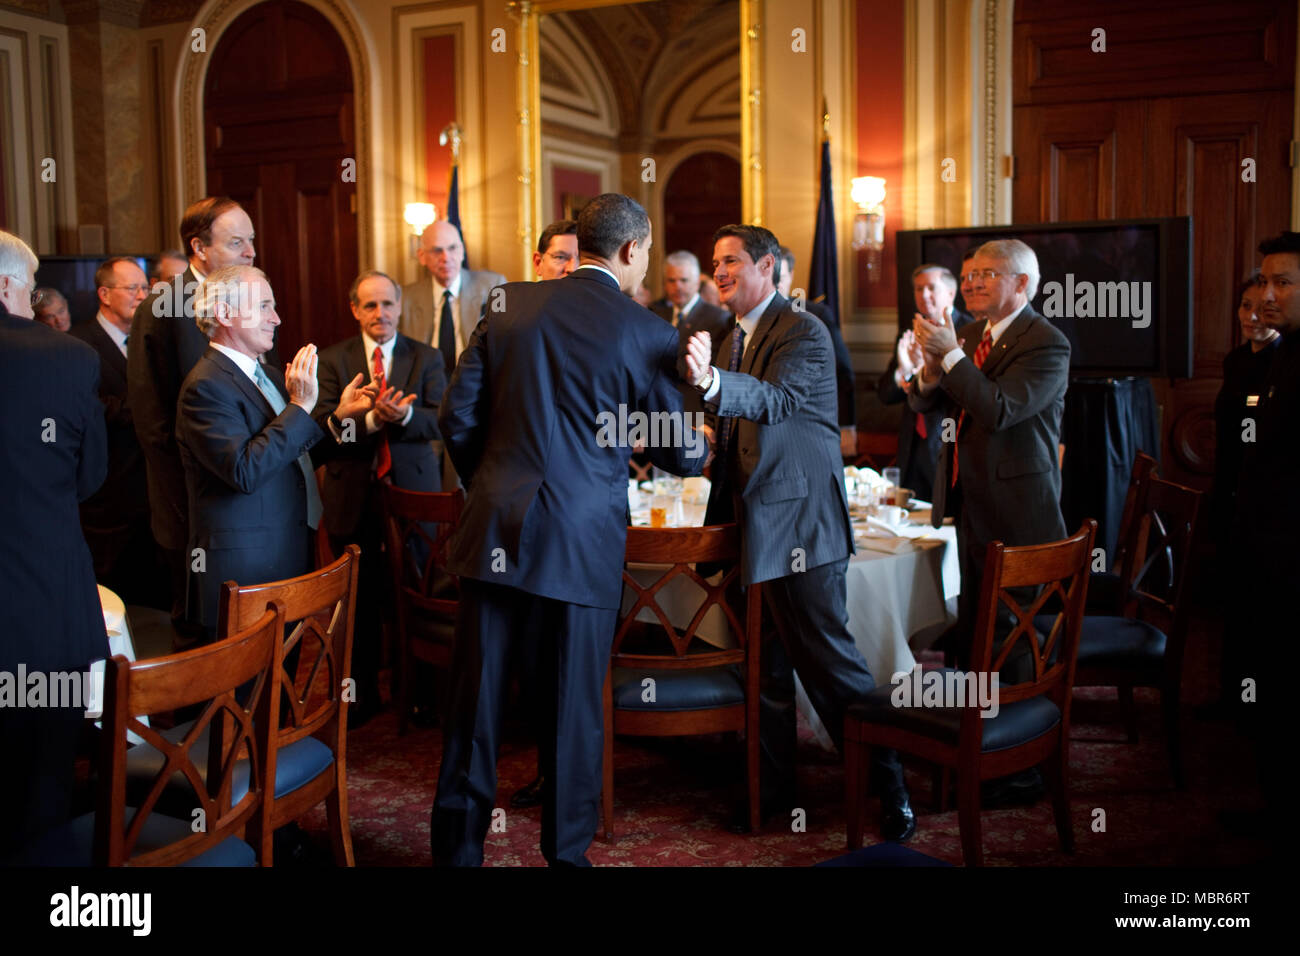 President Barack Obama attends a lunch with Senate Republicans on Capitol Hill, Washington D.C. 1/27/09. Official White House Photo by Pete Souza Stock Photo